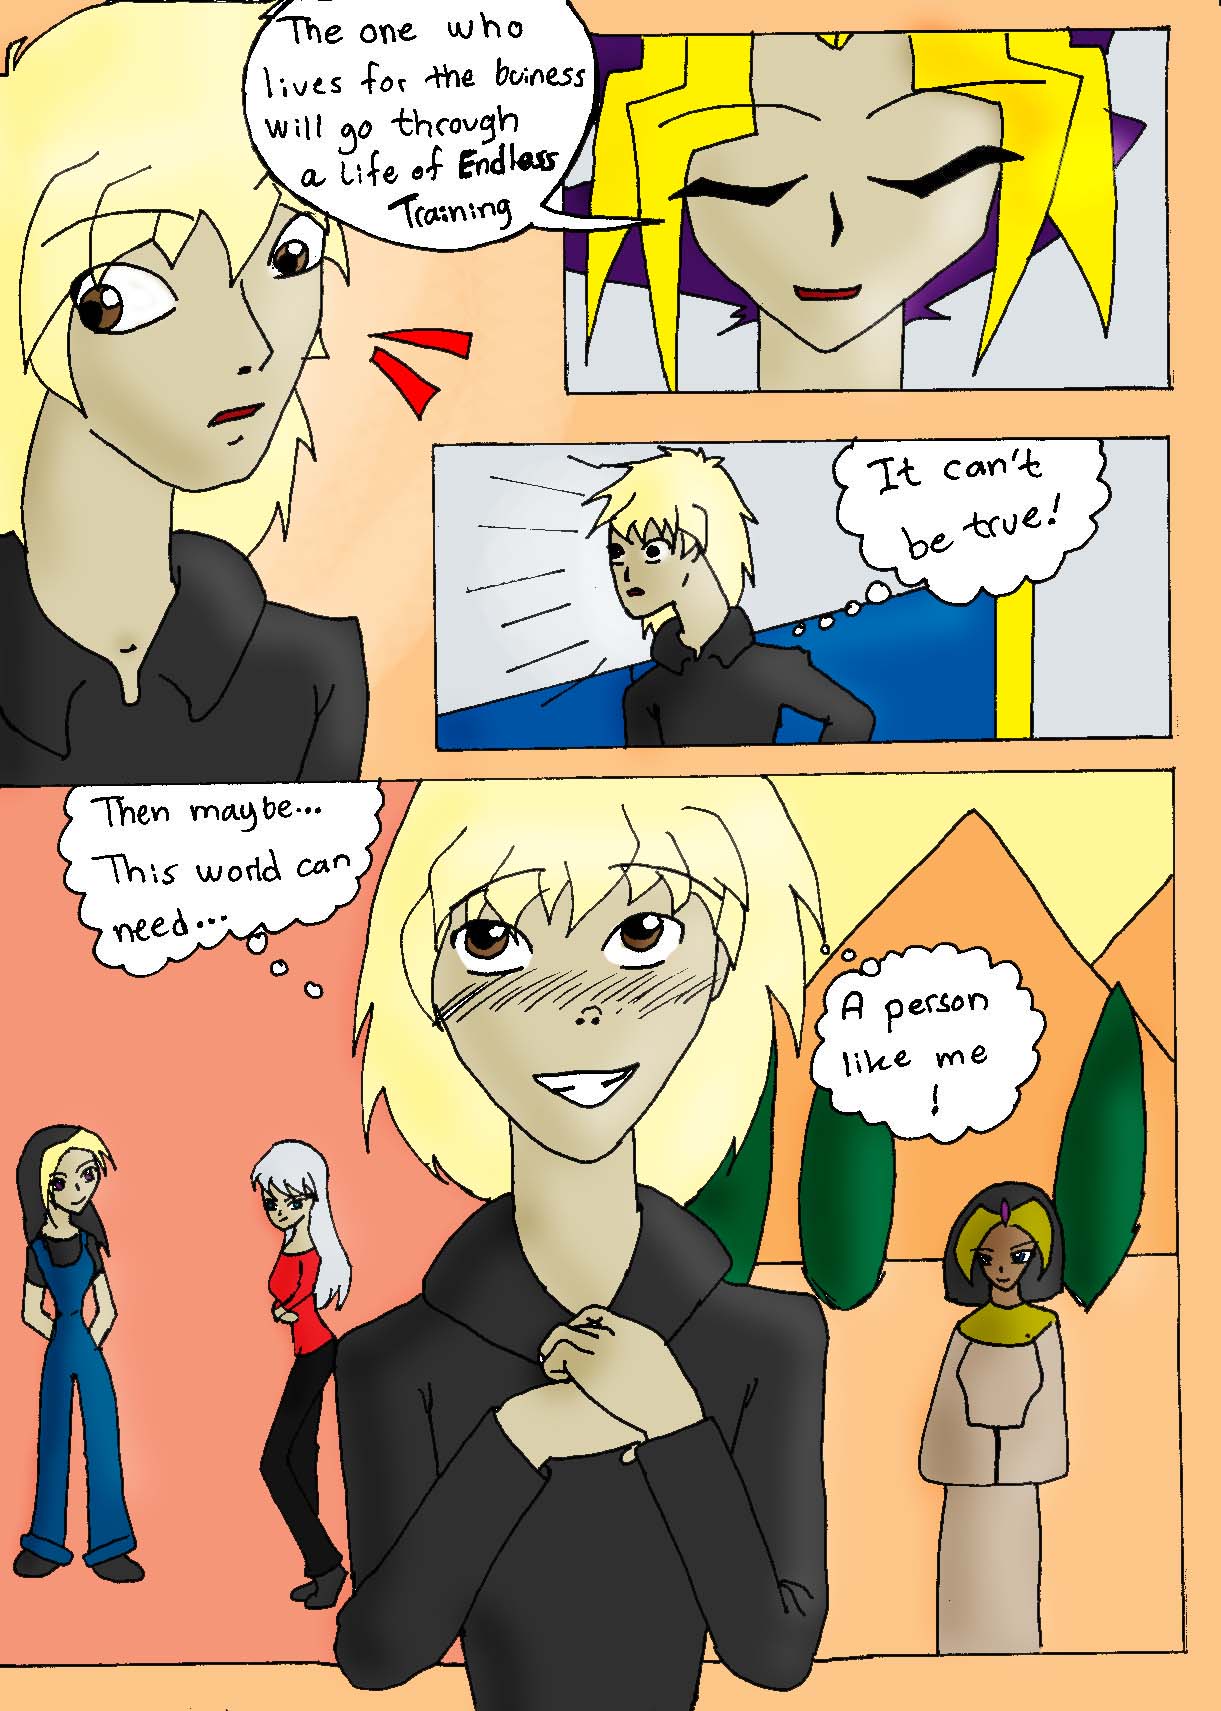 Who am I? Page 7 by Bakura_Angel_of_Light